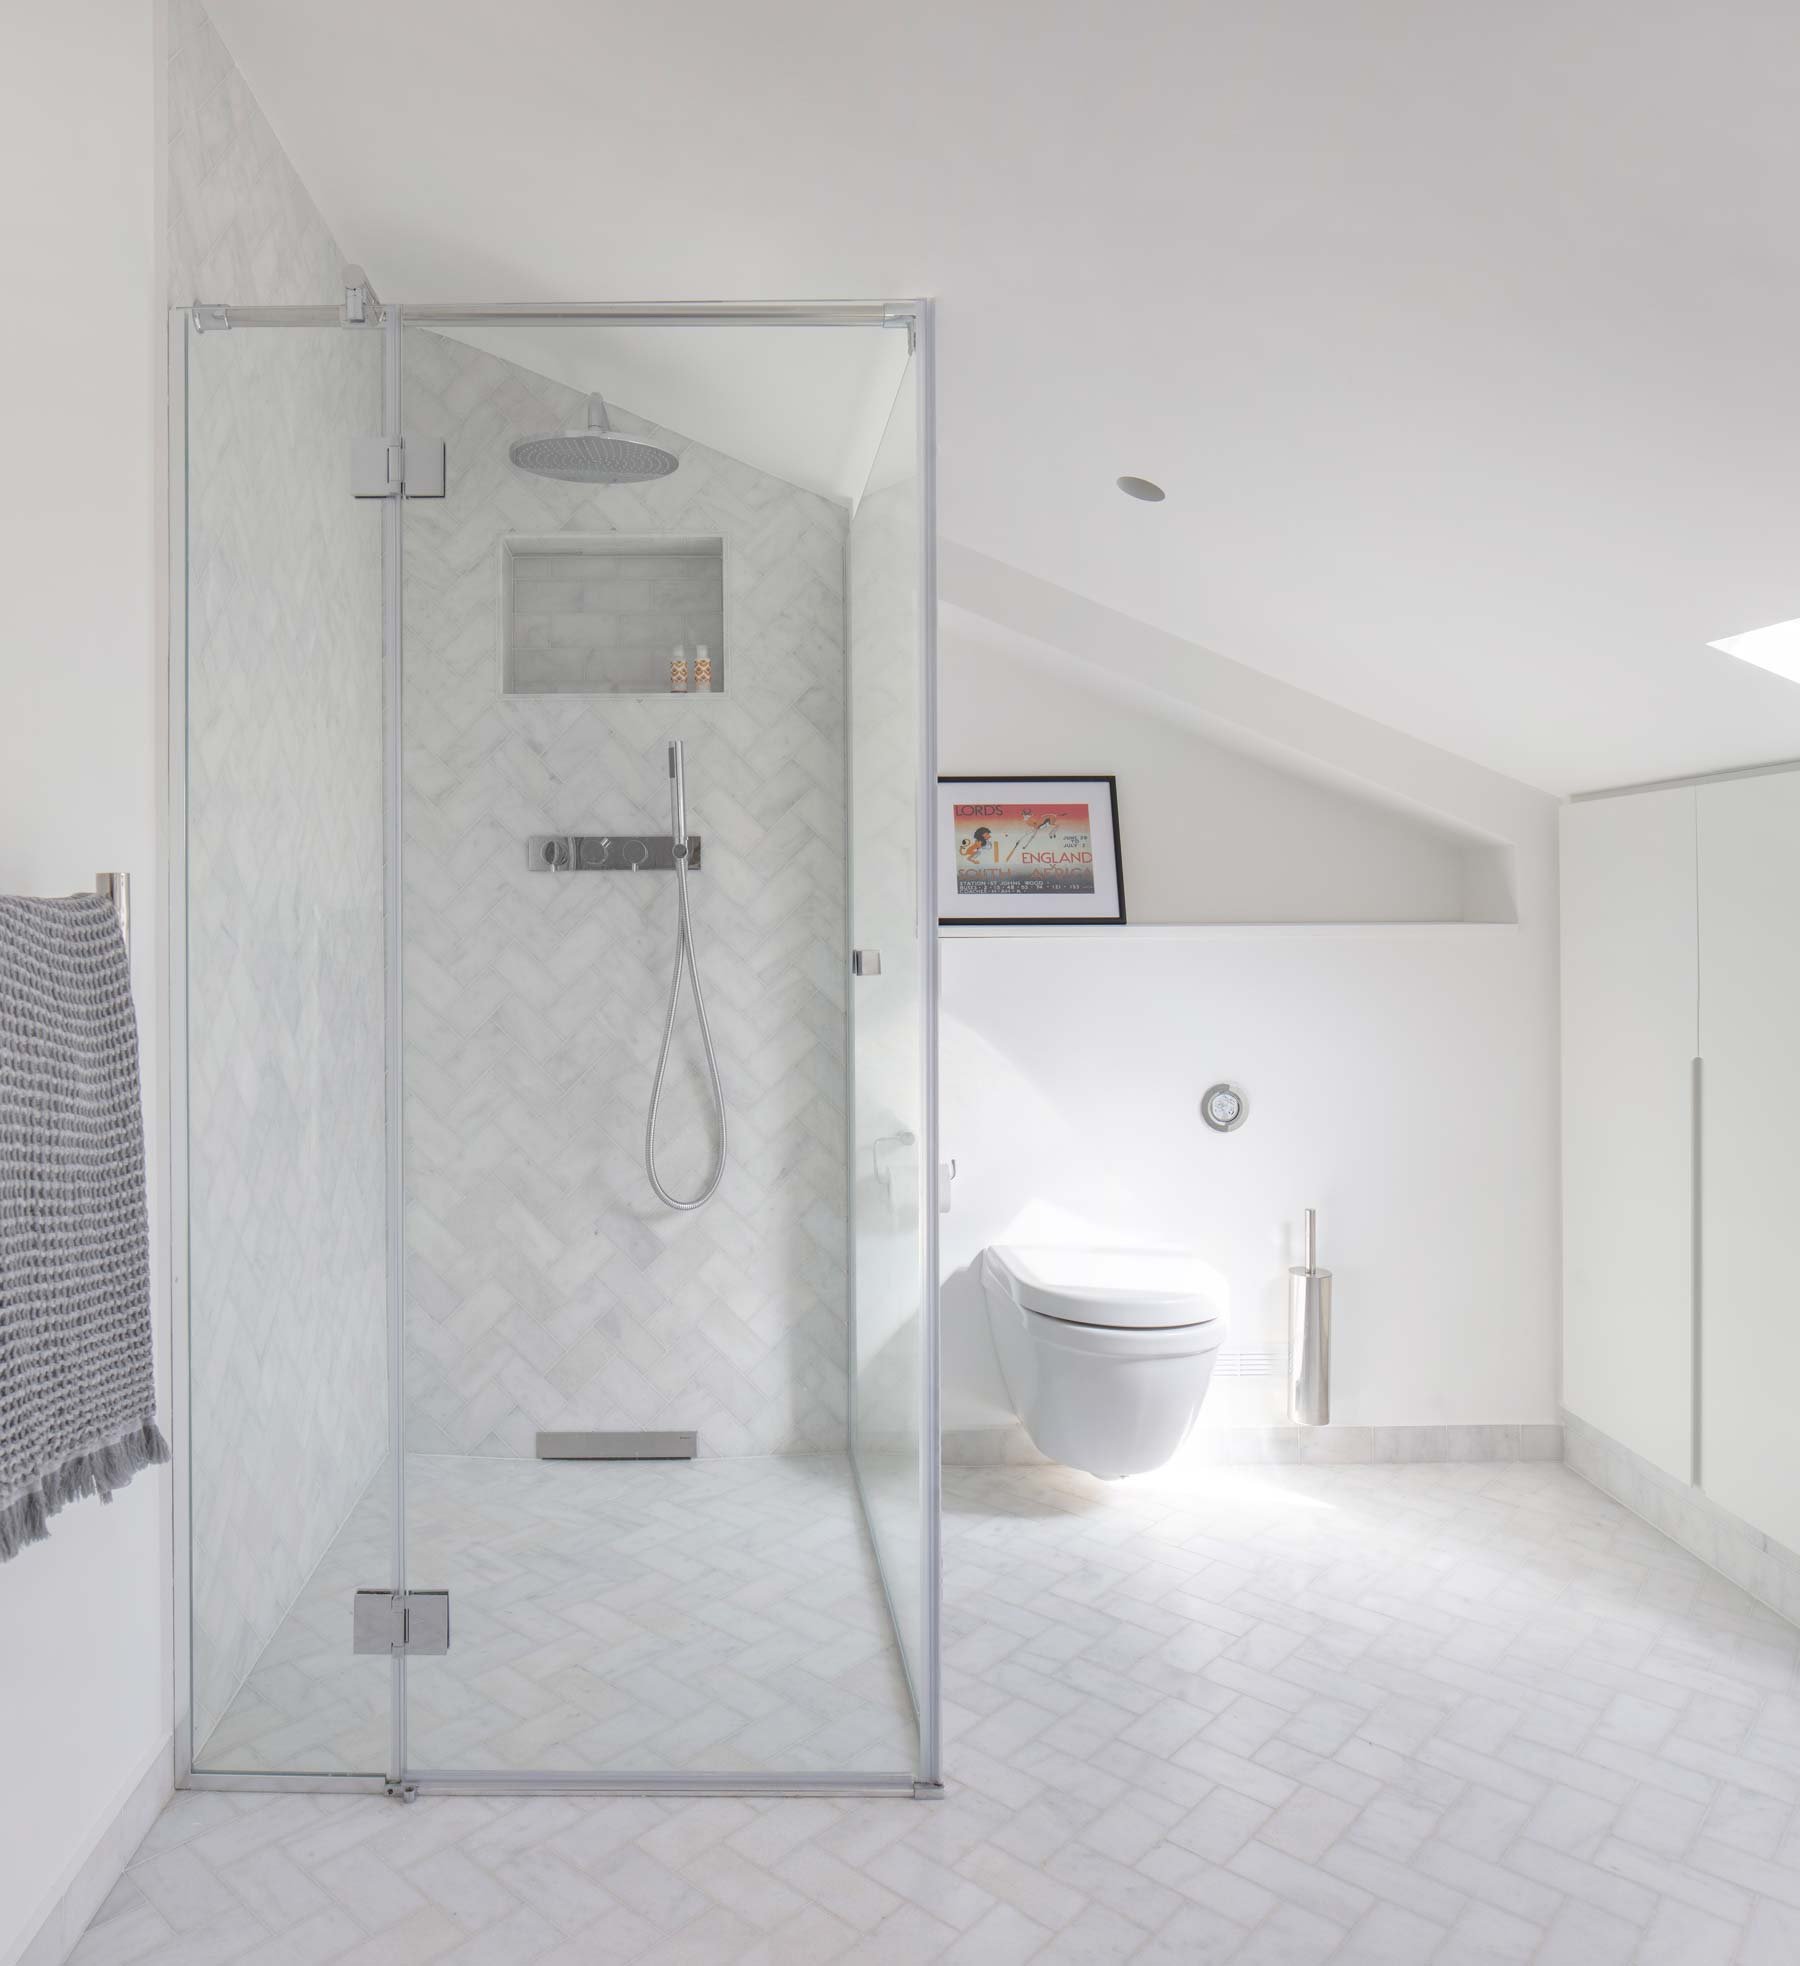 Herringbone wall and floor tiles inb this loft conversion extension shower room in SW12, Wandsworth